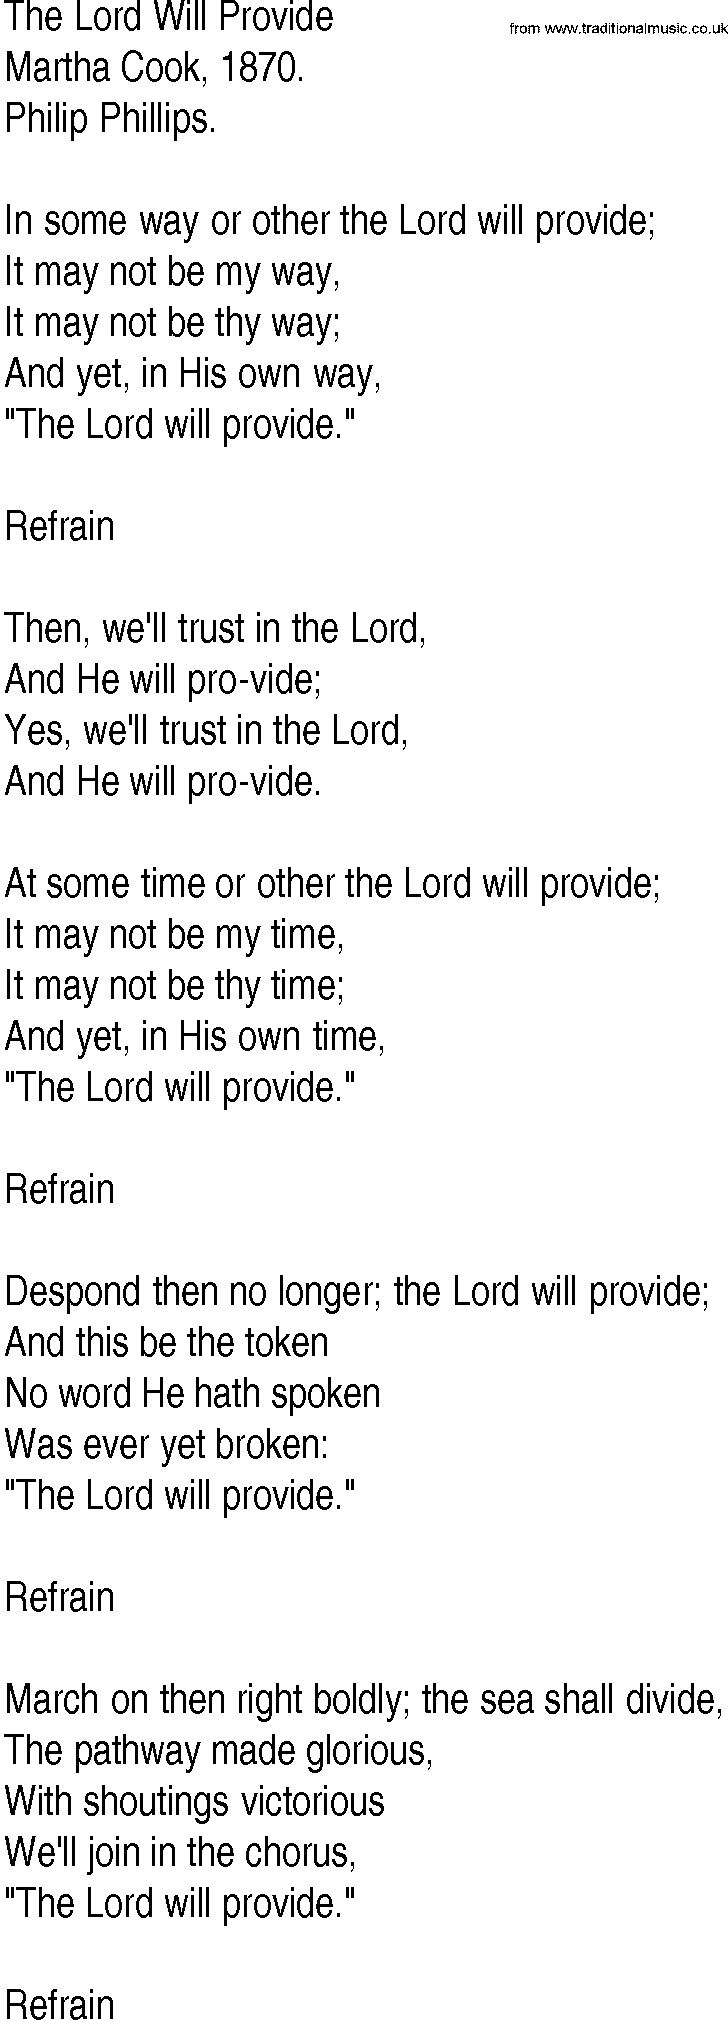 Hymn and Gospel Song: The Lord Will Provide by Martha Cook lyrics